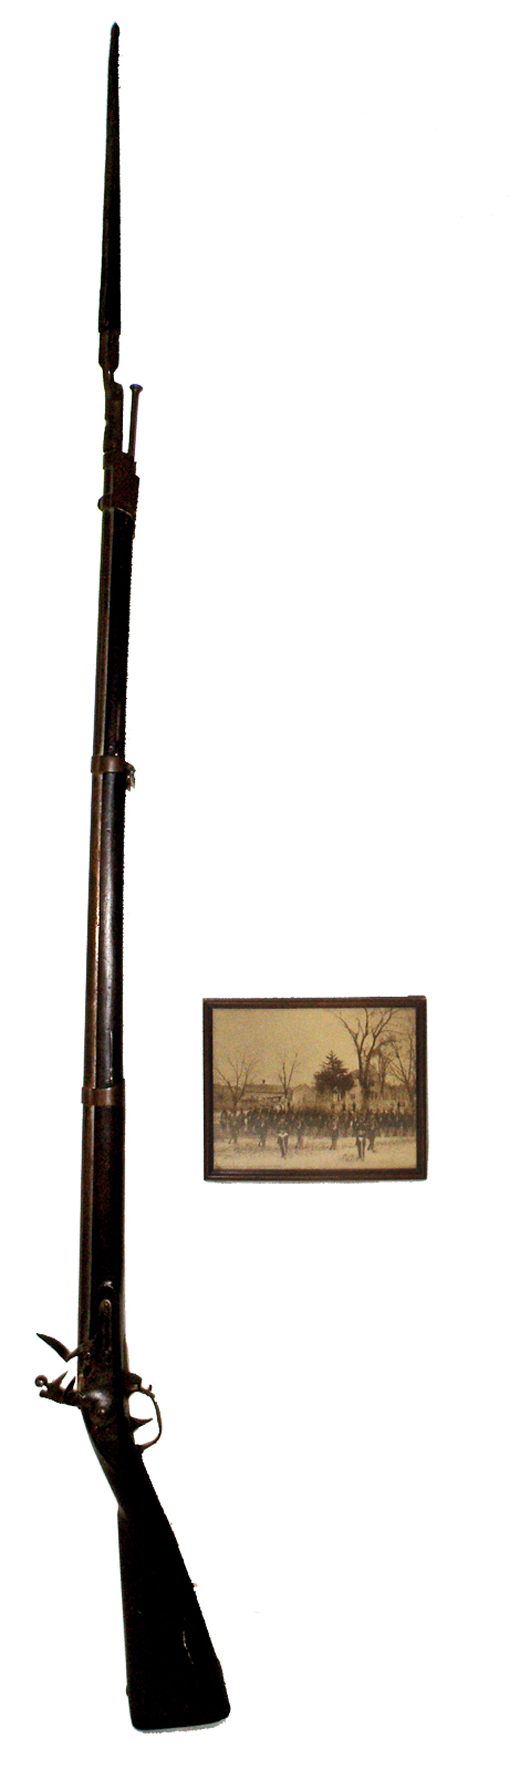 Civil War musket of Union Sgt. Gustavus B. Williams, direct family provenance. Mosby & Co. image.   